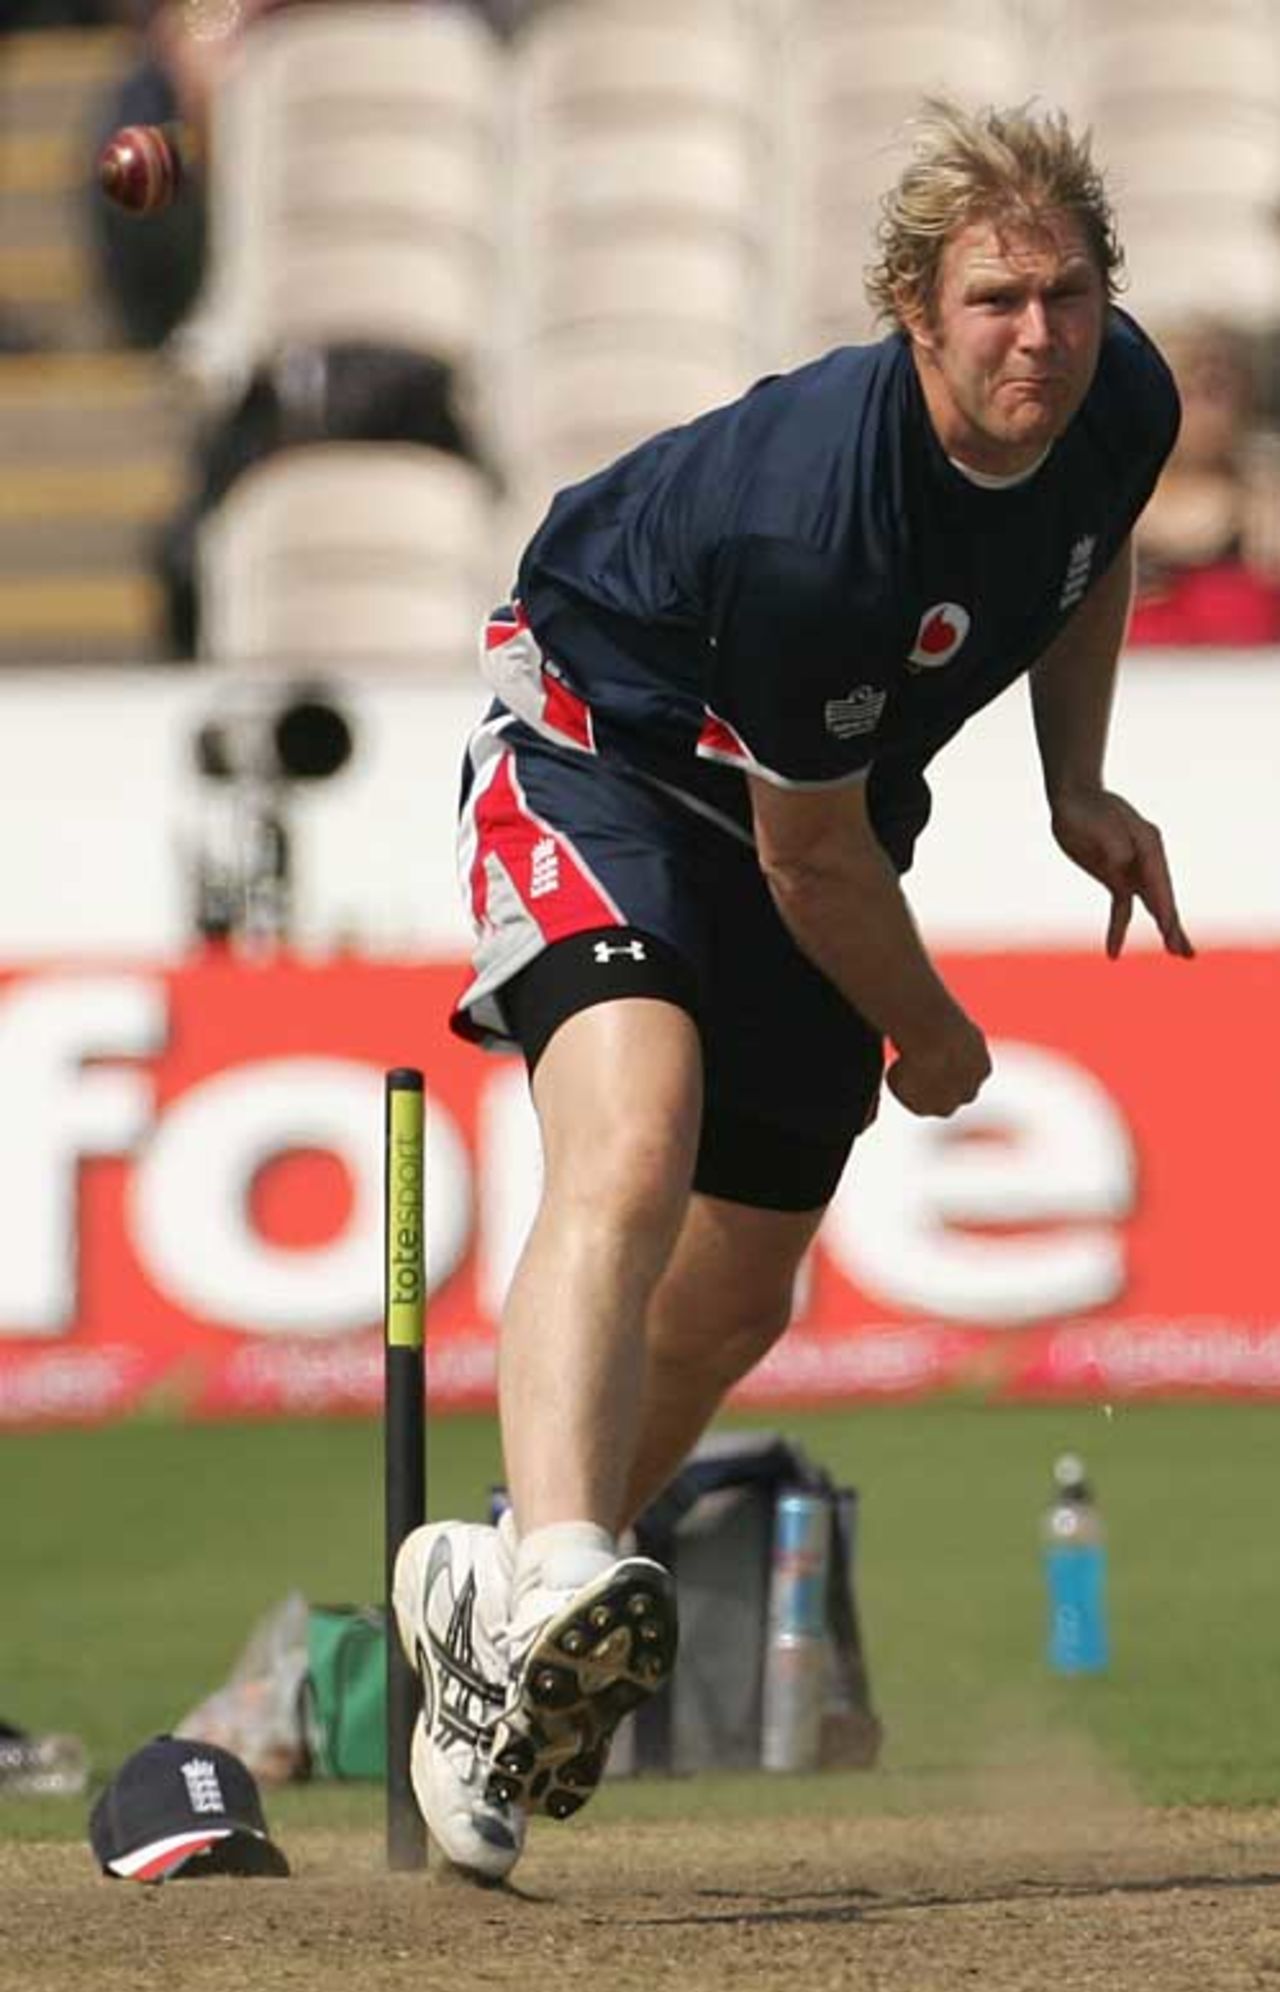 Matthew Hoggard joined his England team-mates on the third day at Old Trafford, England v West Indies, 3rd Test, Old Trafford, June 9, 2007